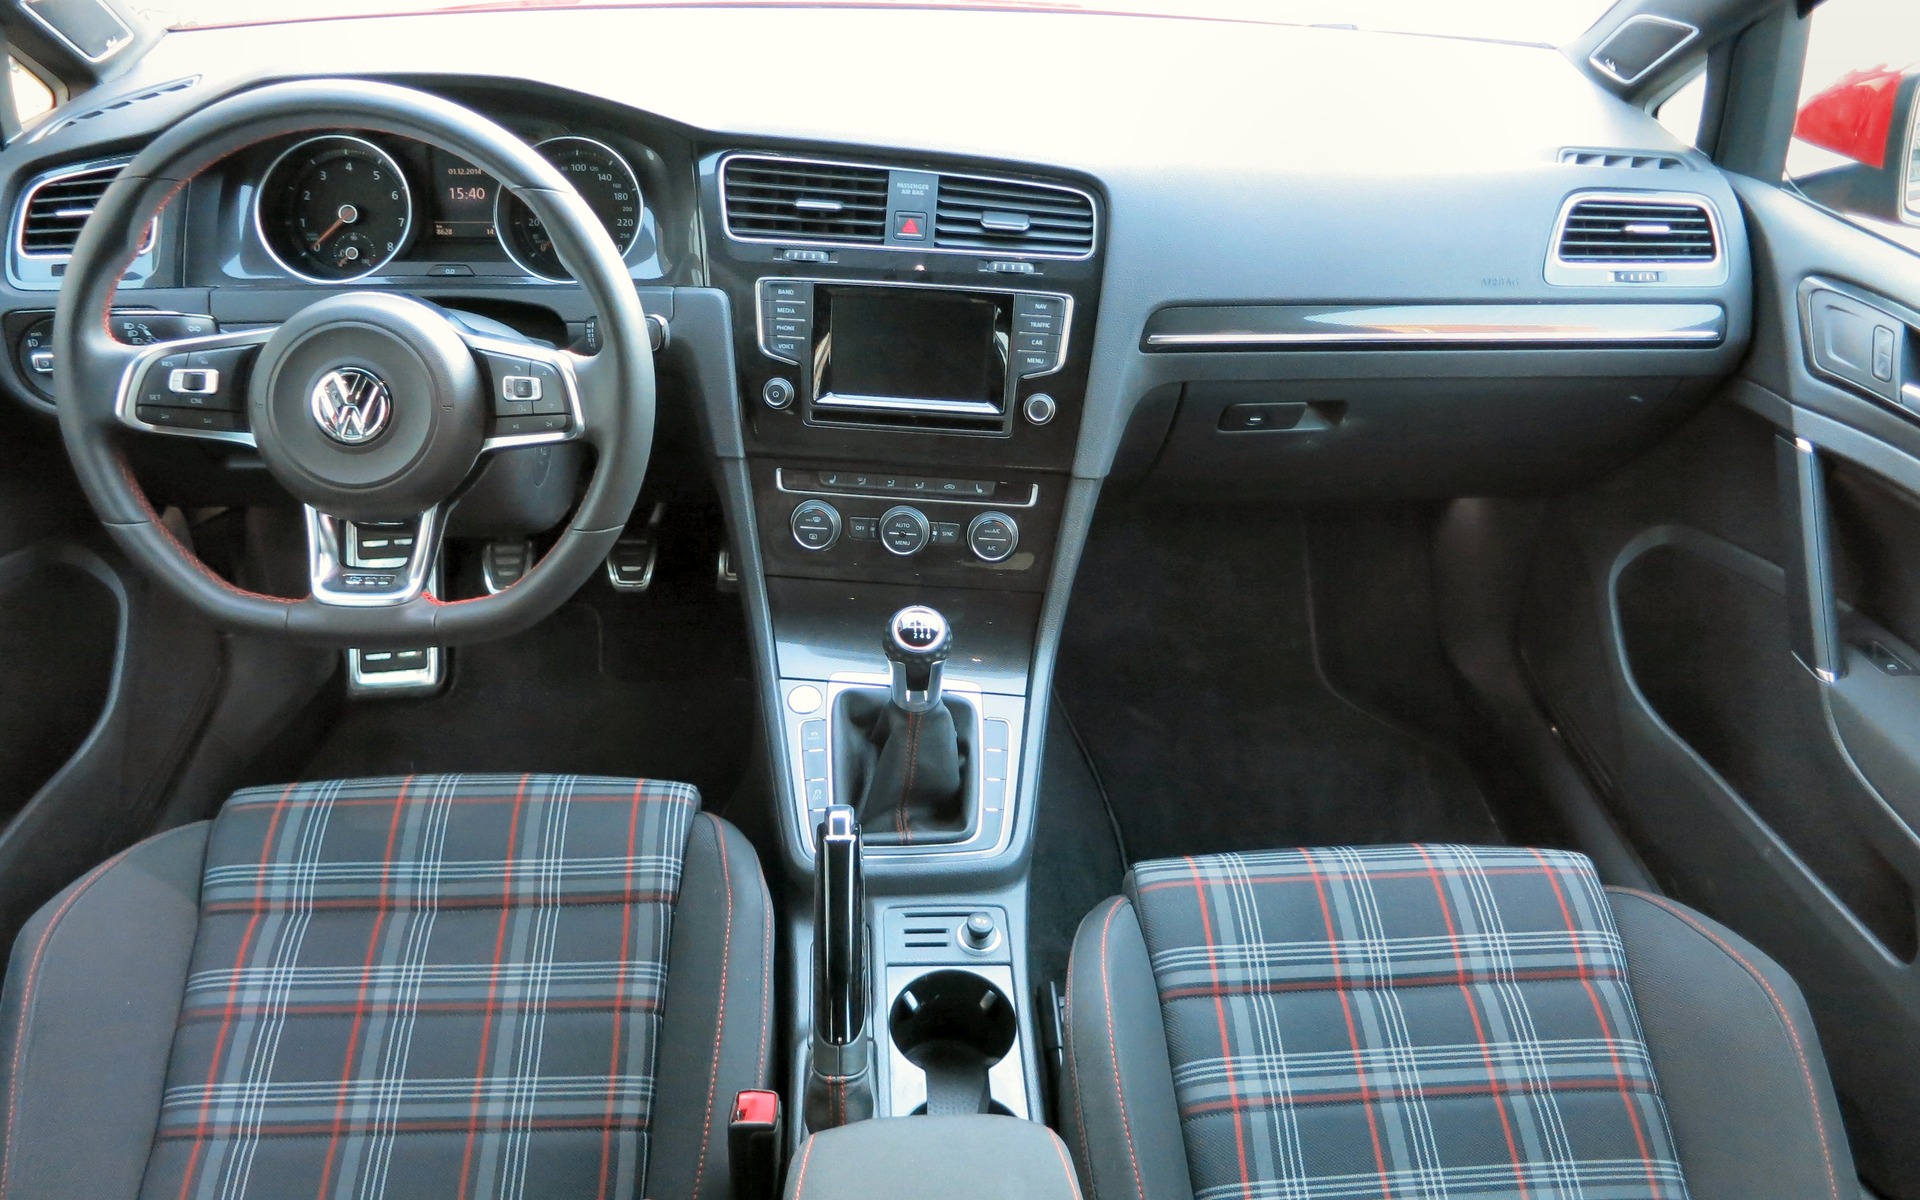 The new VW Golf GTI maintains its trademark plaid cloth upholstery.